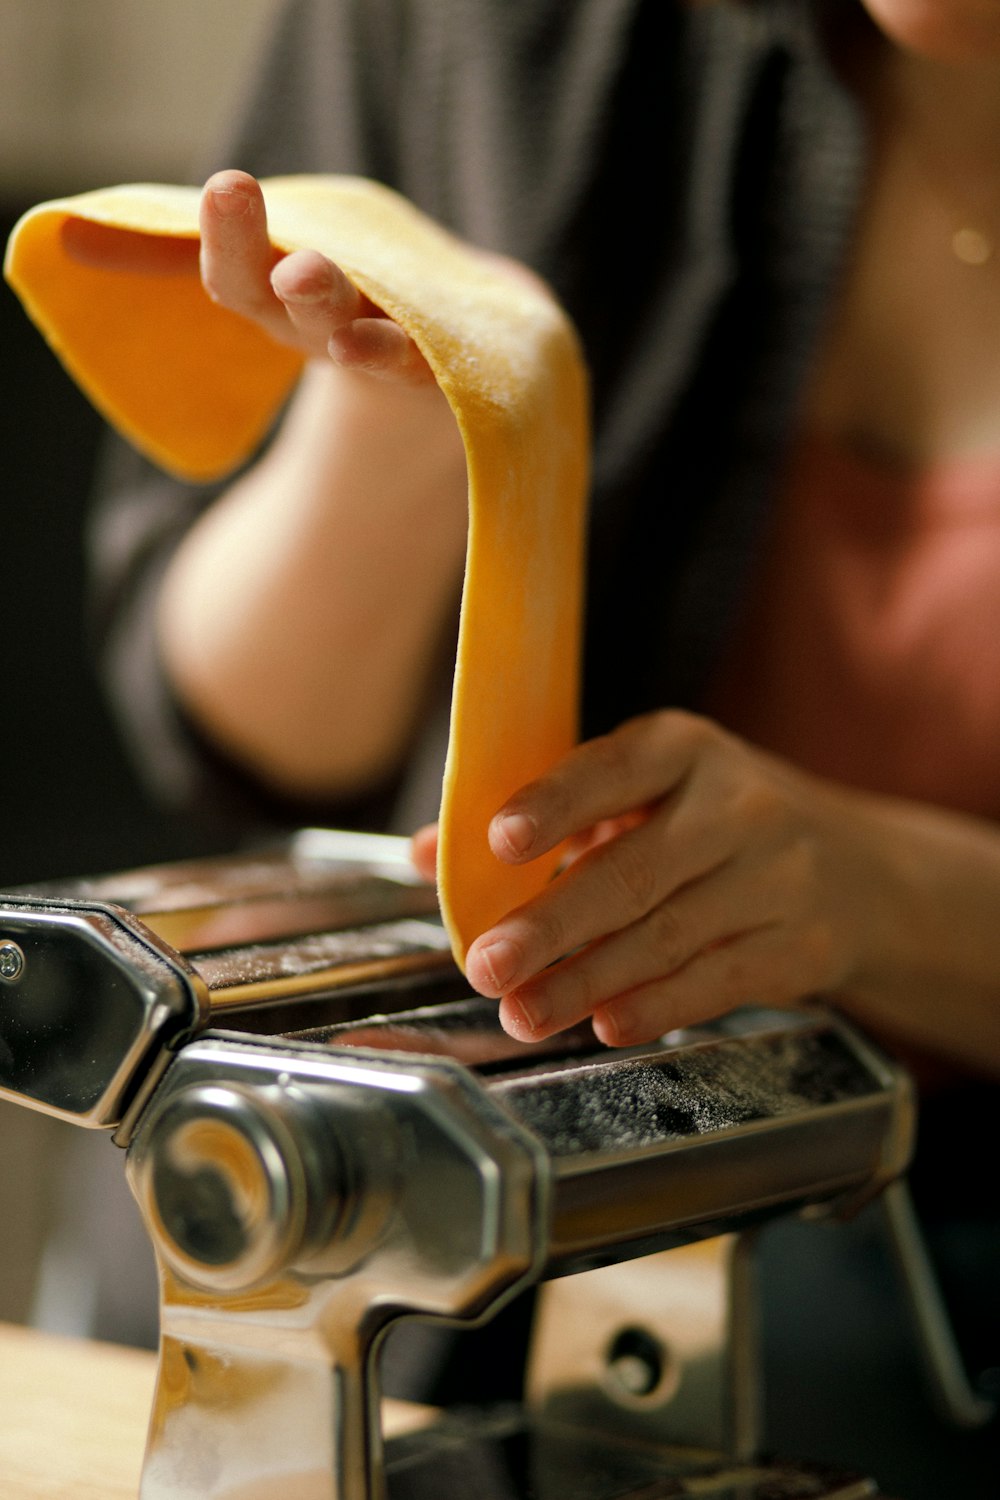 a person is peeling a banana on a machine